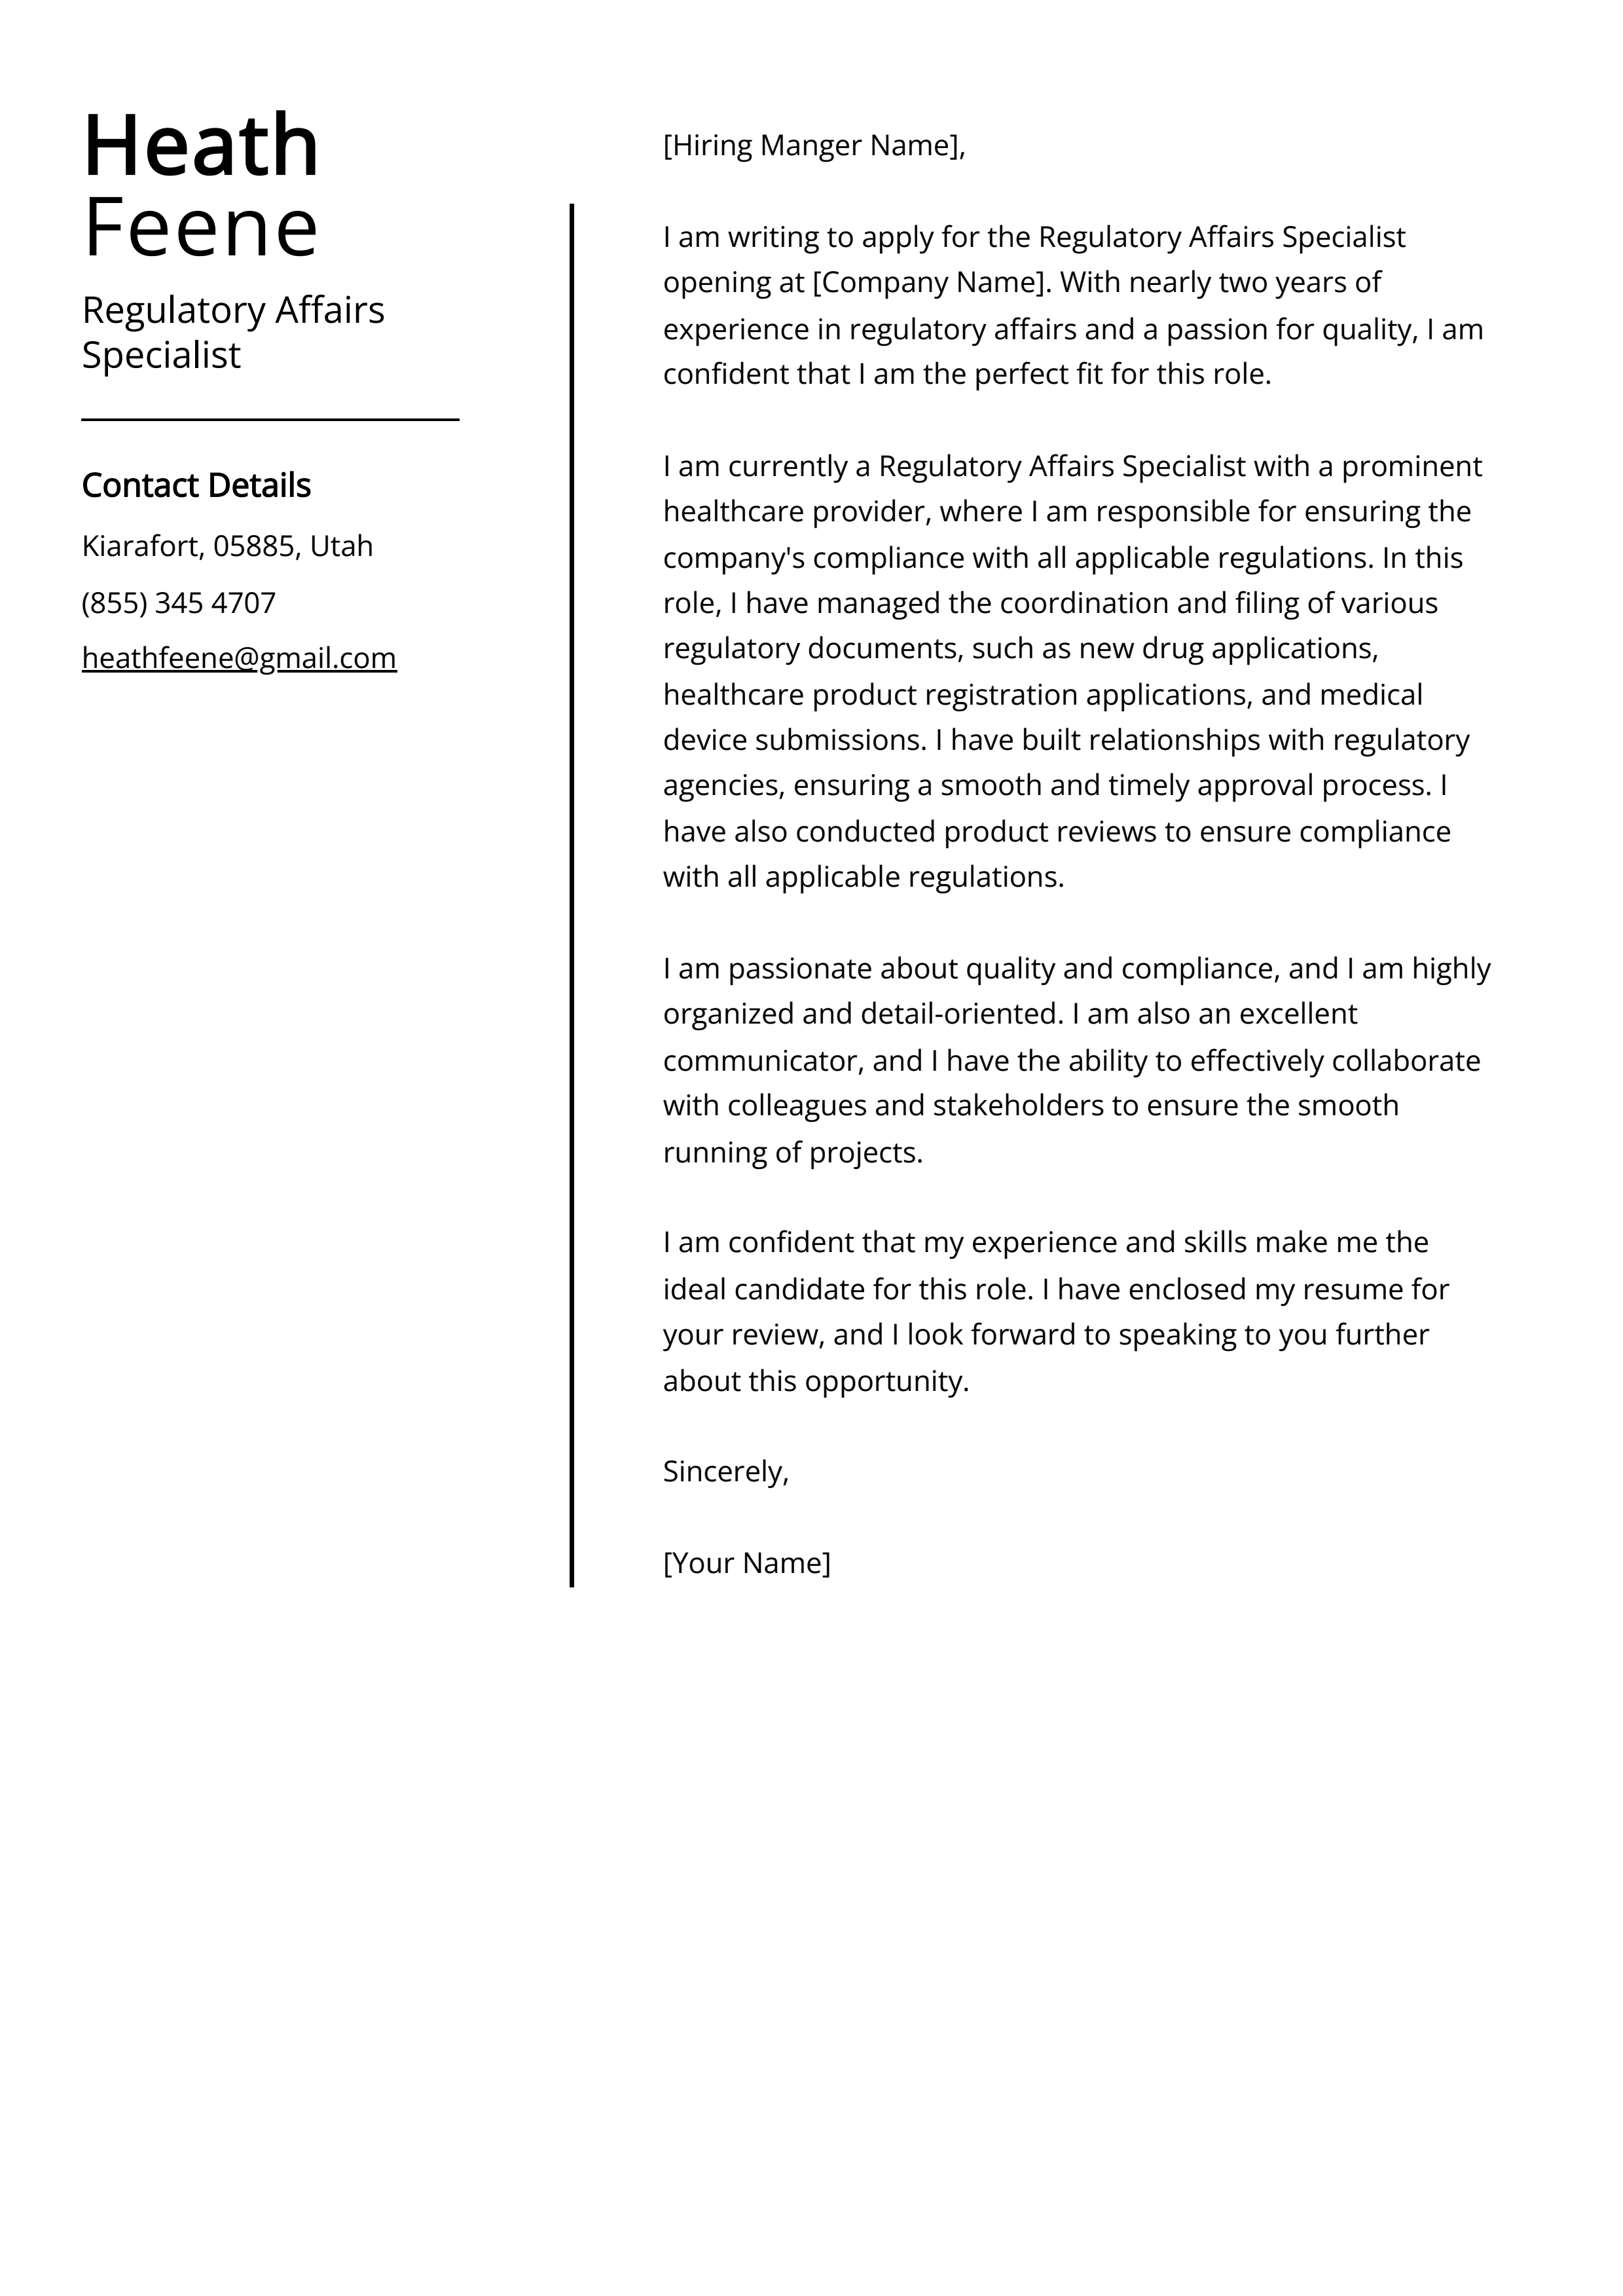 Regulatory Affairs Specialist Cover Letter Example